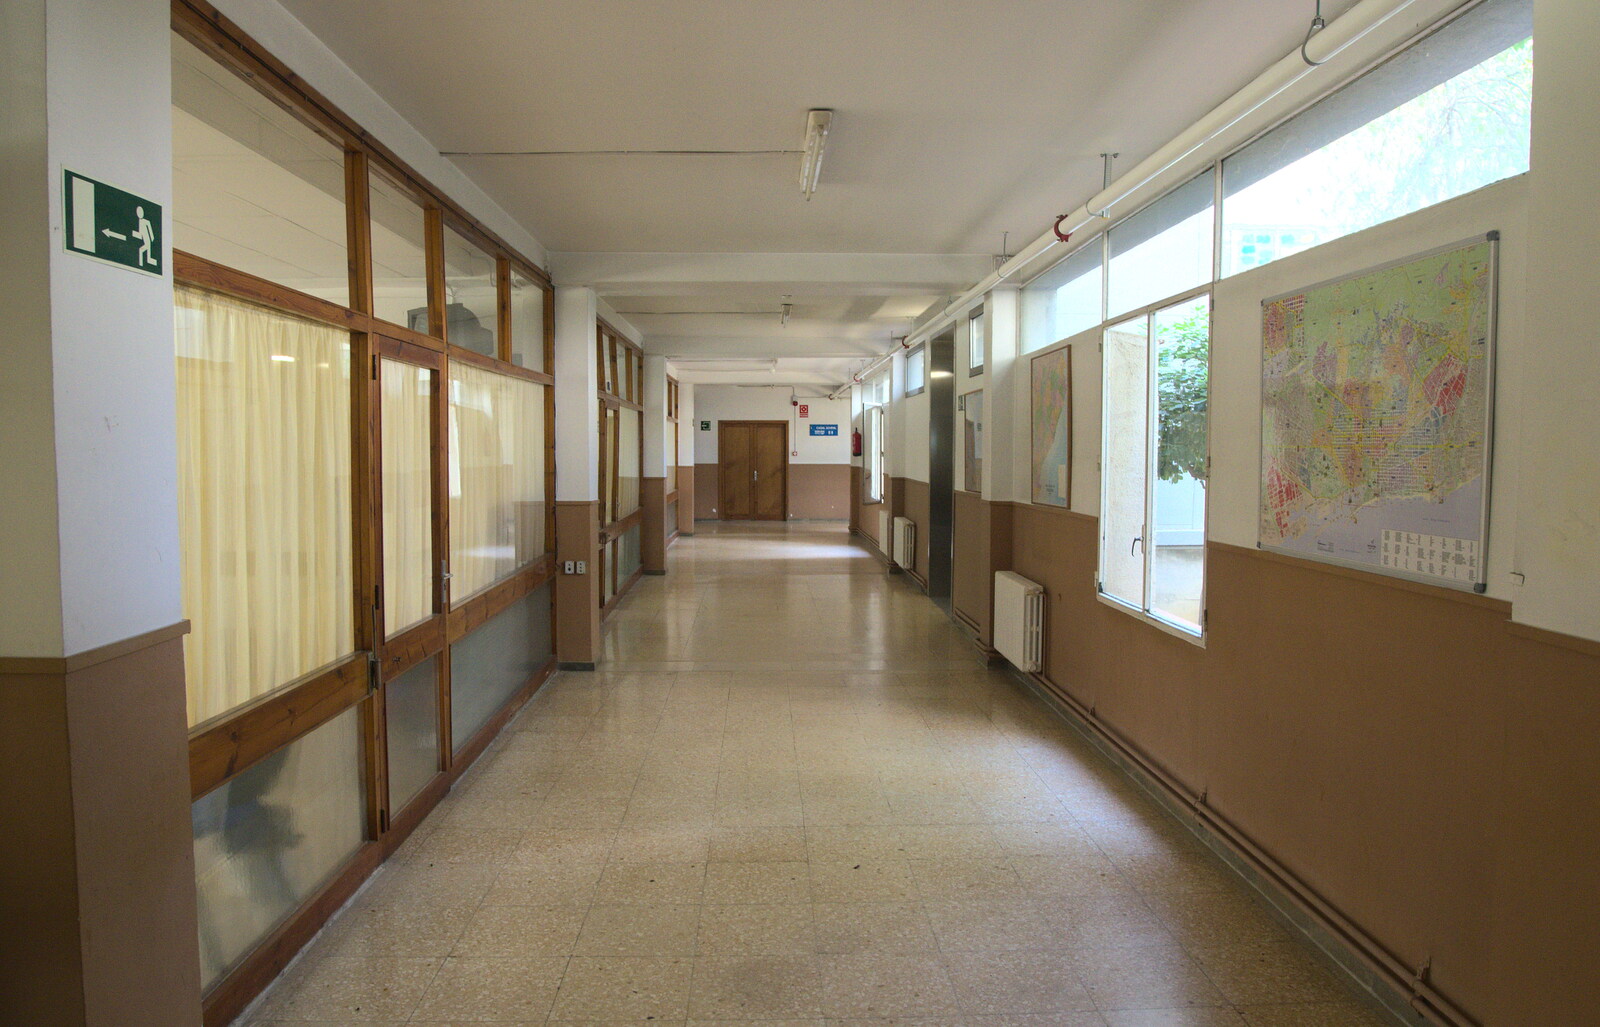 More deserted 1970s corridors from The Open Education Challenge, Barcelona, Catalonia - 13th July 2014